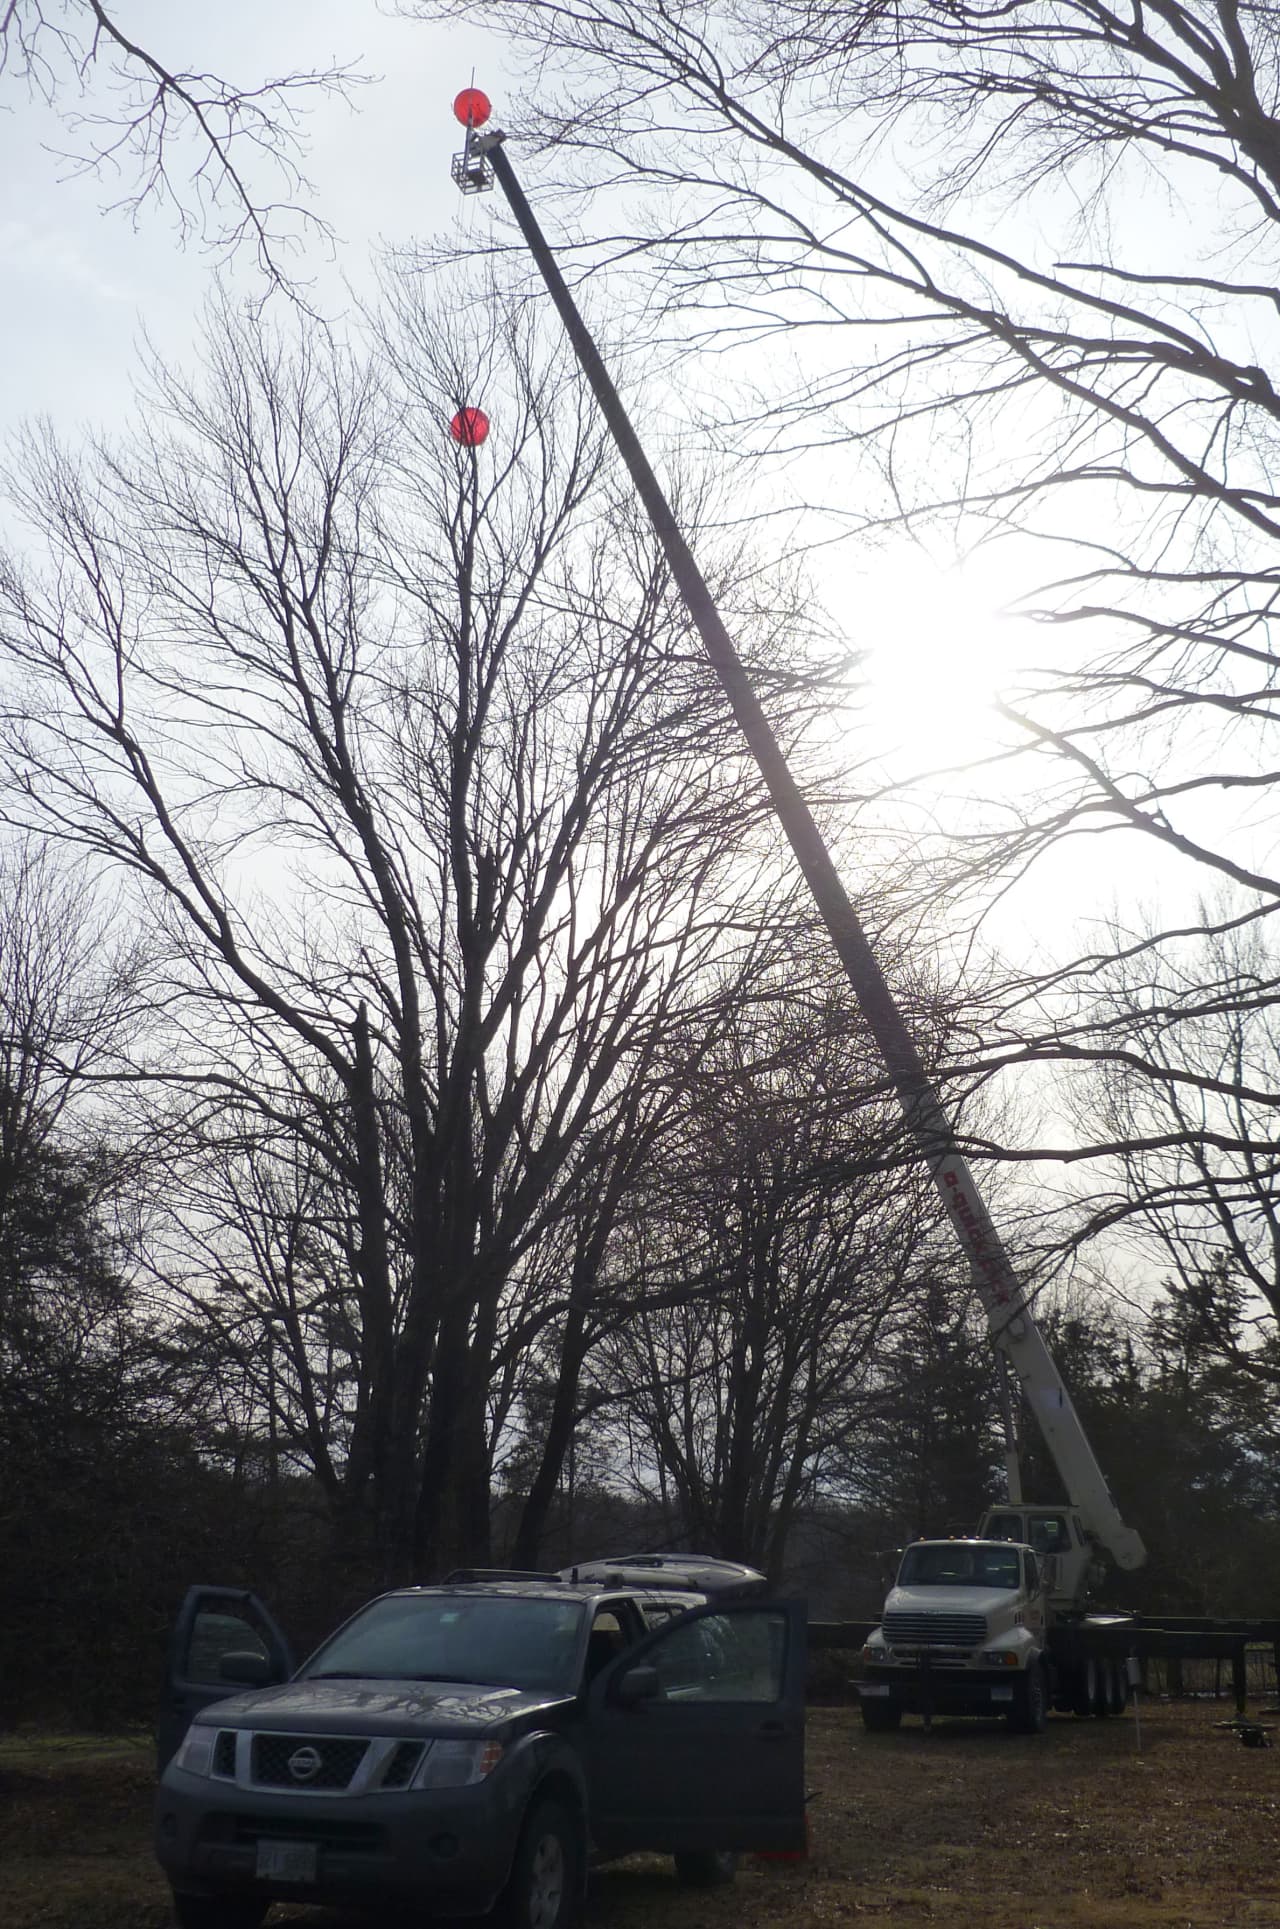 Balloons like the ones seen here were floated above the transfer station in New Canaan by AT&T to test it as a possible location for a cellphone tower. 